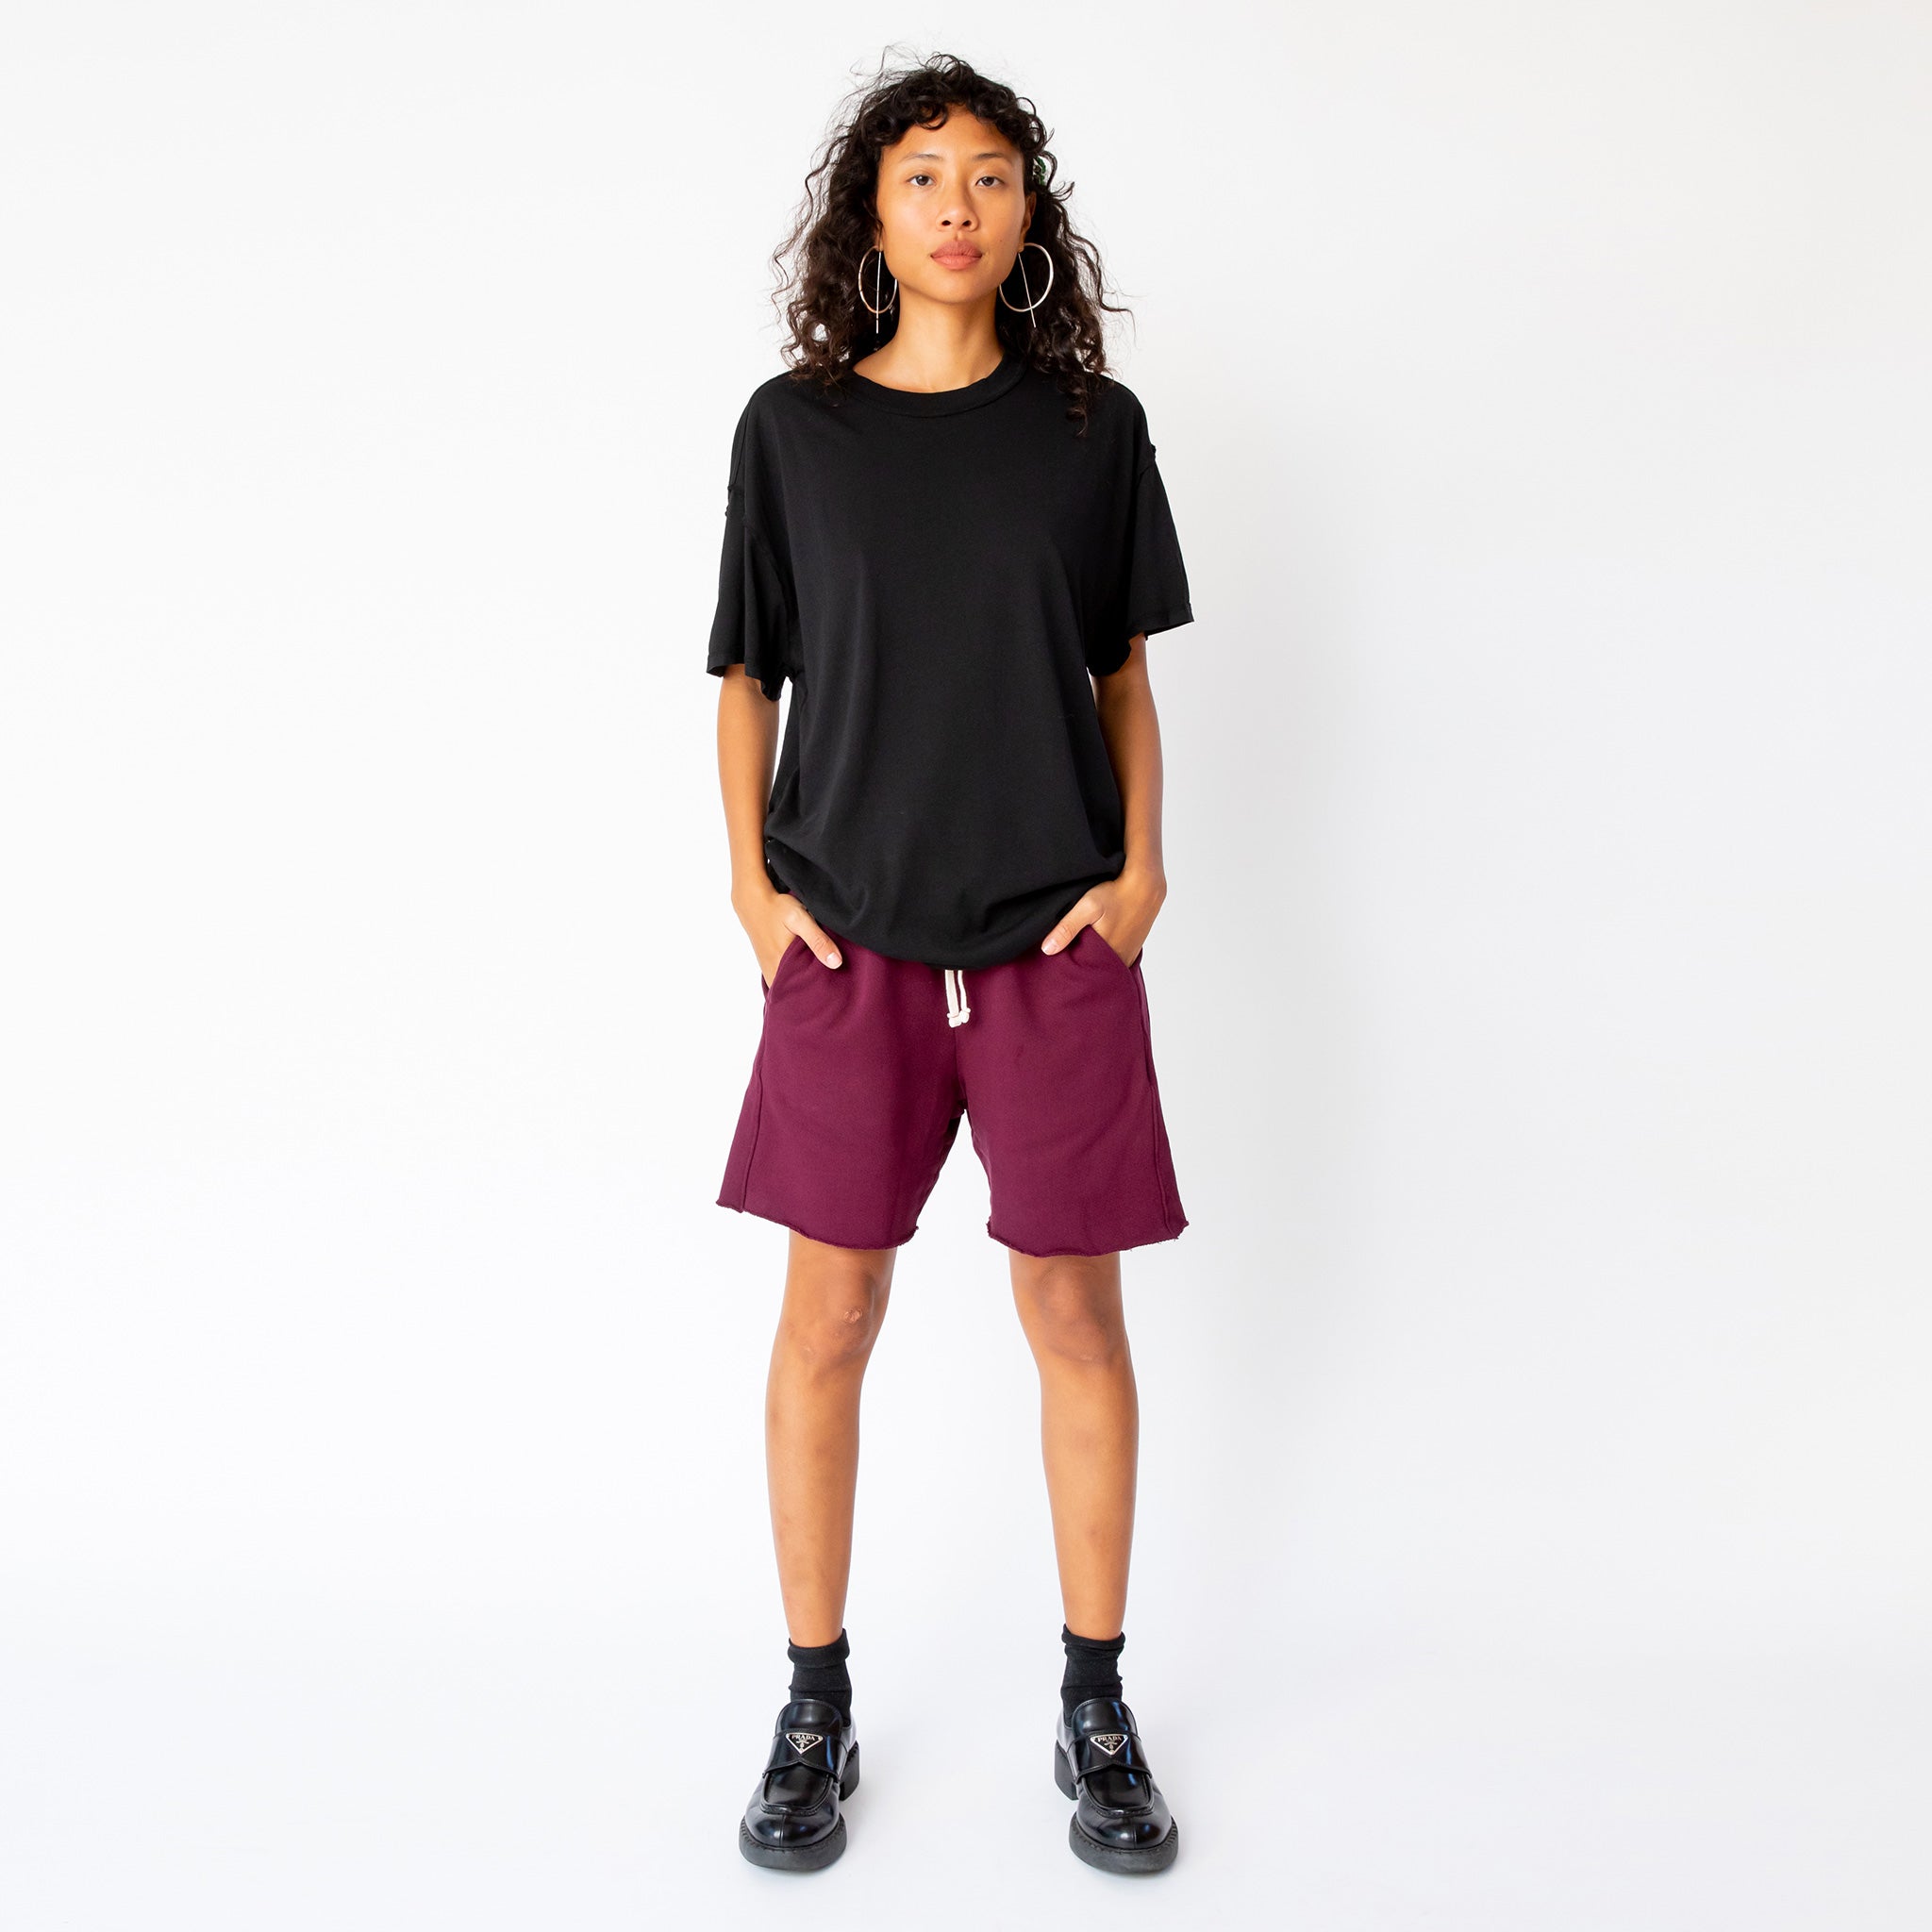 A model wears the merlot-red pigment dyed Yacht sweat shorts by Les Tien, paired with a black t-shirt and black loafers - full outfit view.